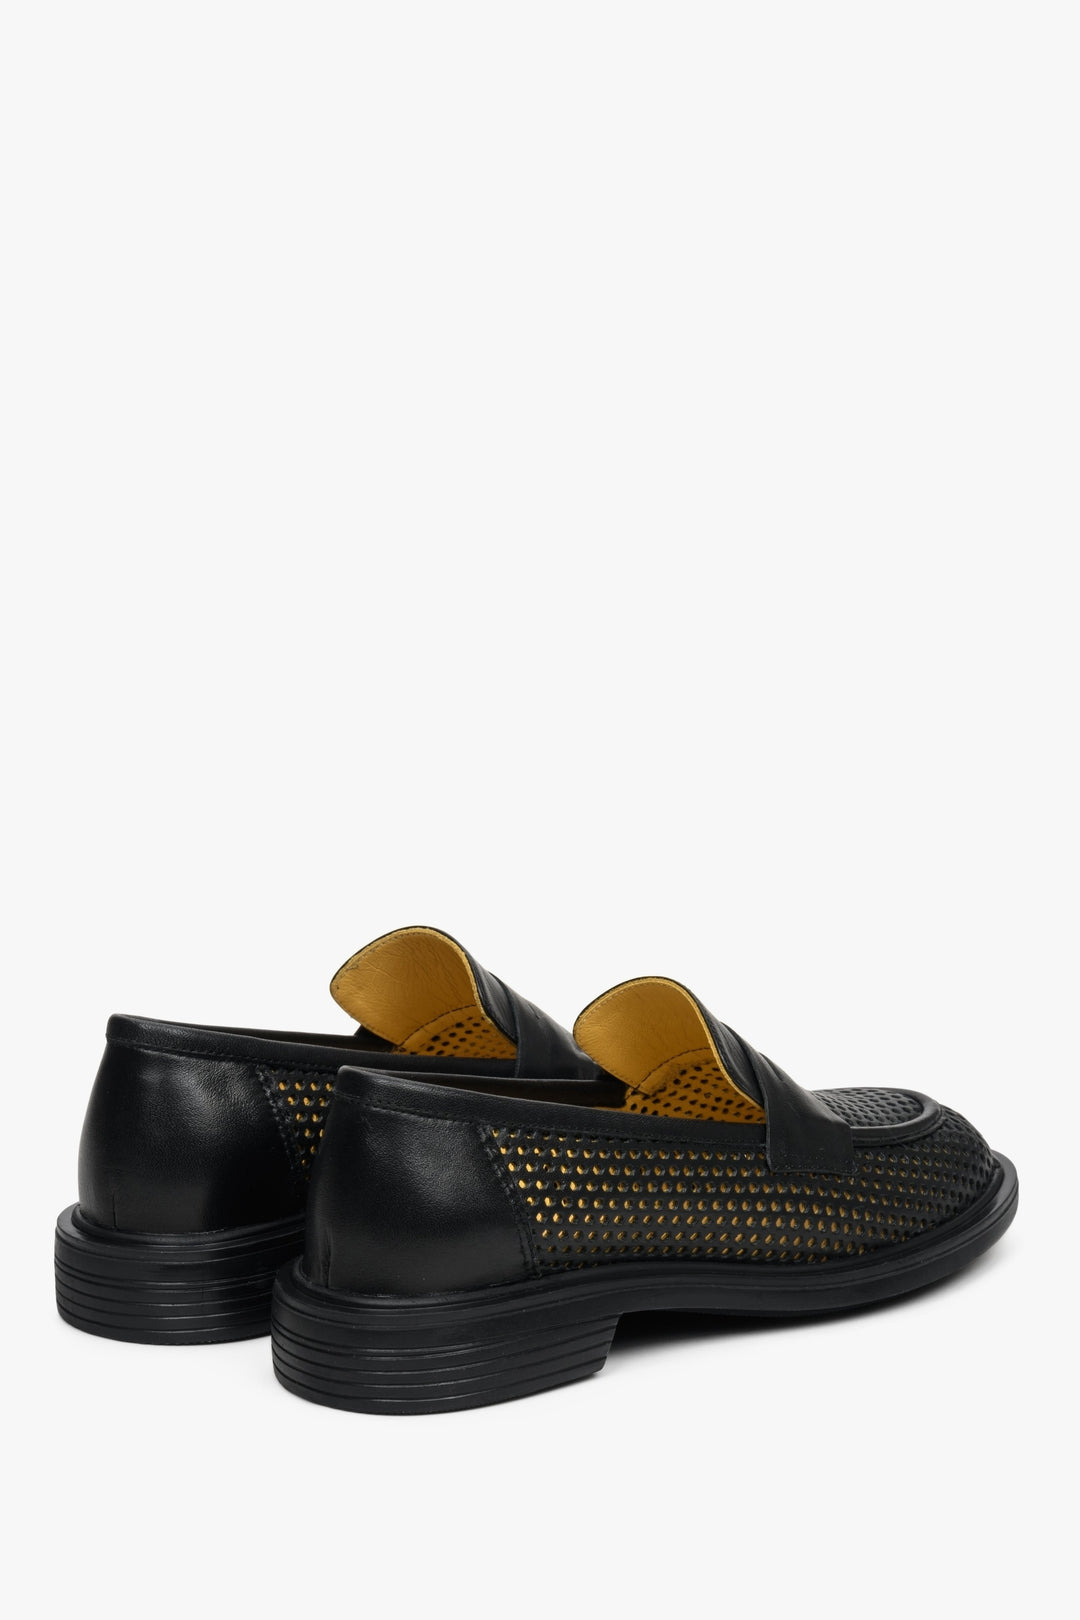 Comfortable black perforated women's loafers - close-up on the heel.